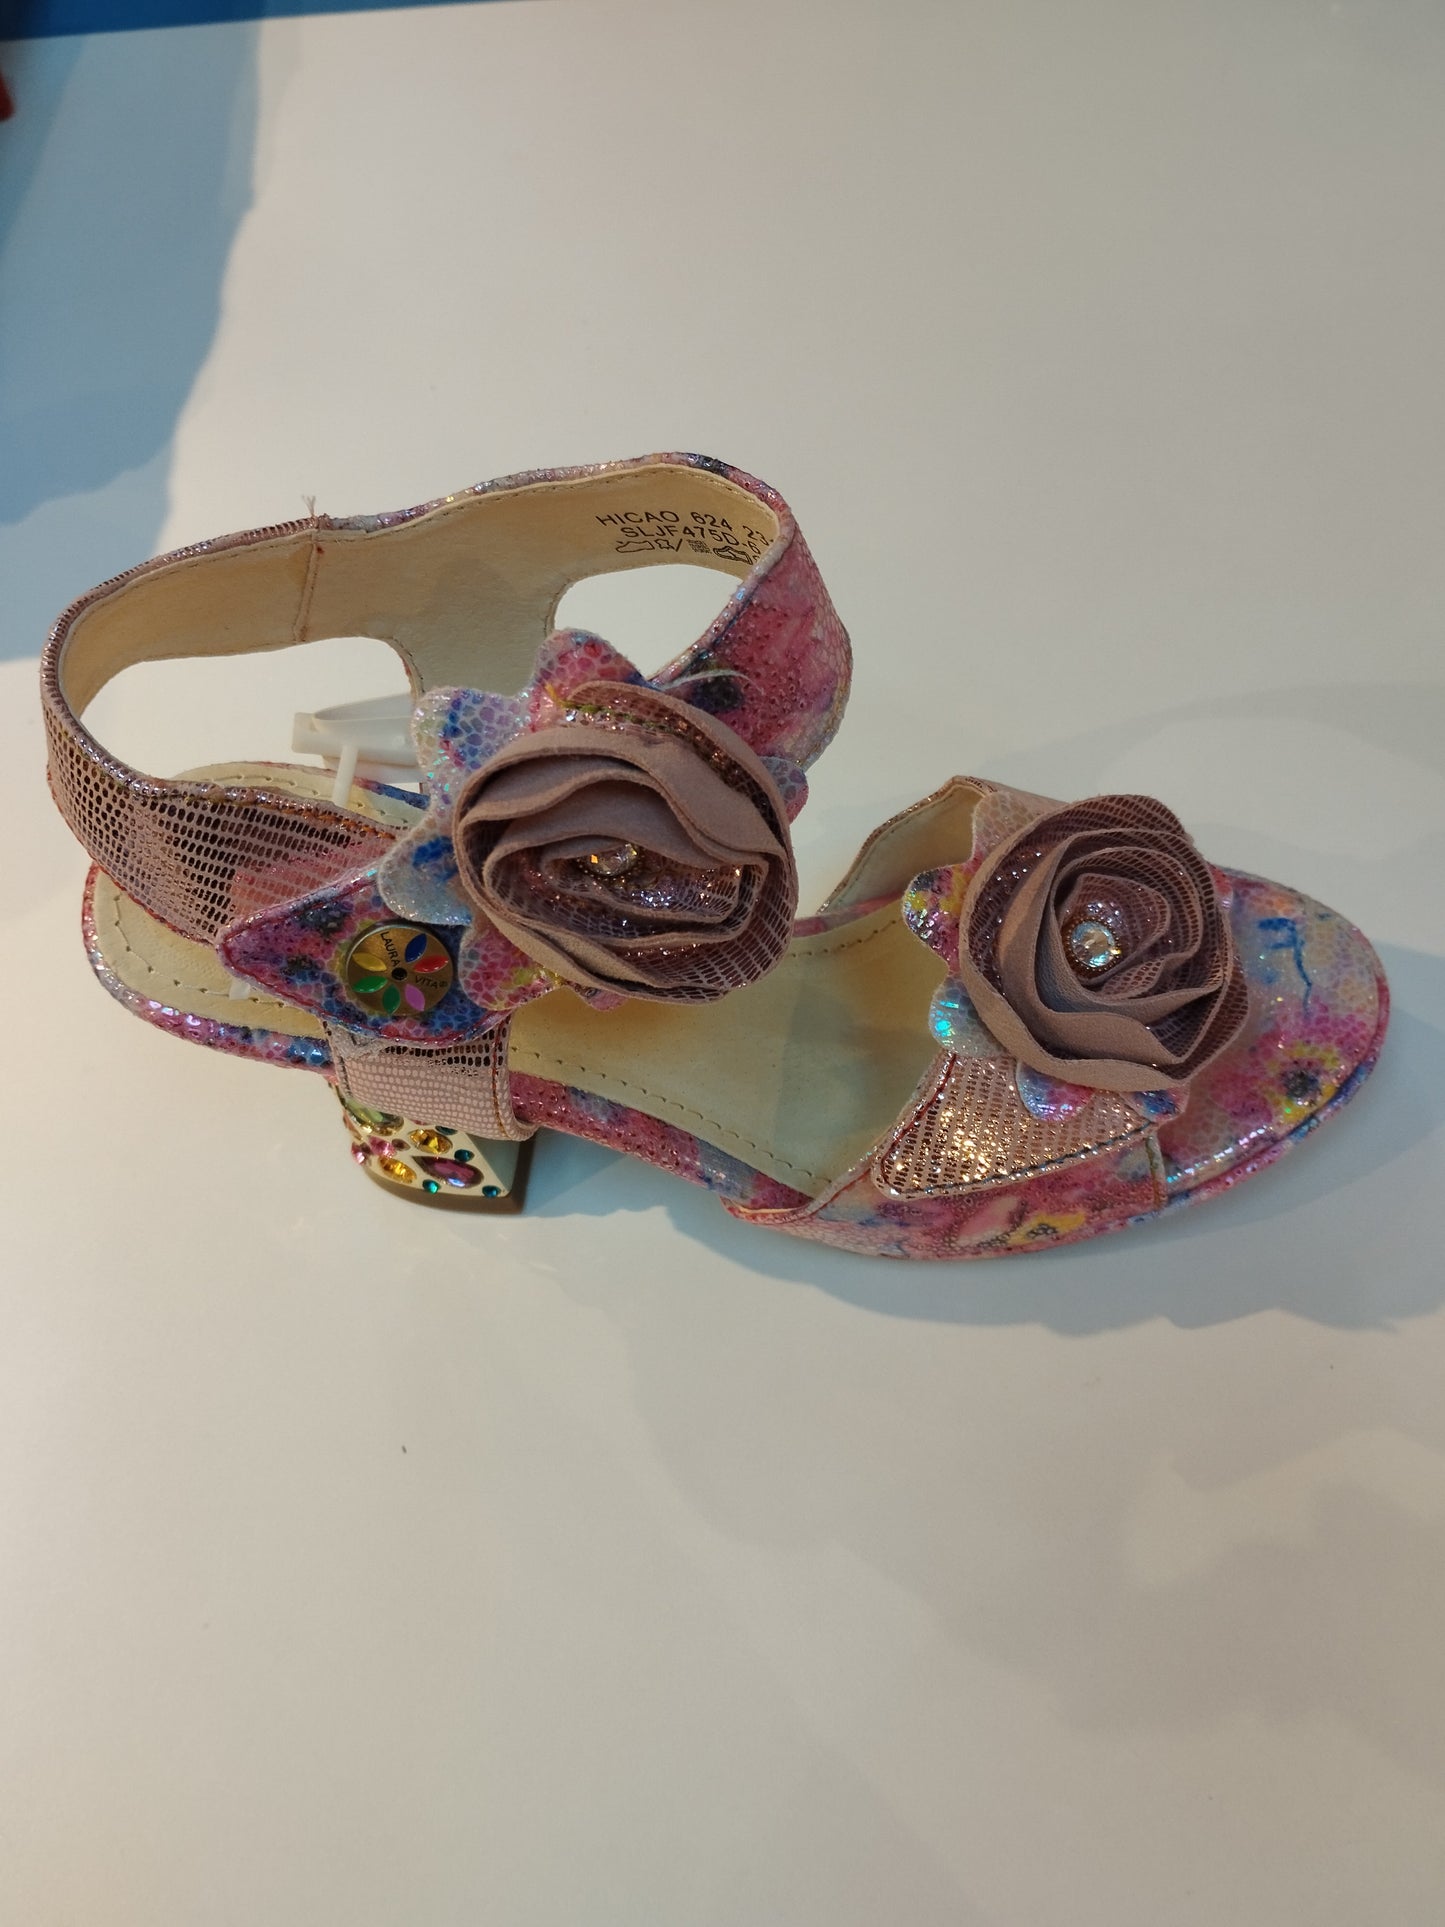 HICAO ROSE SANDALS